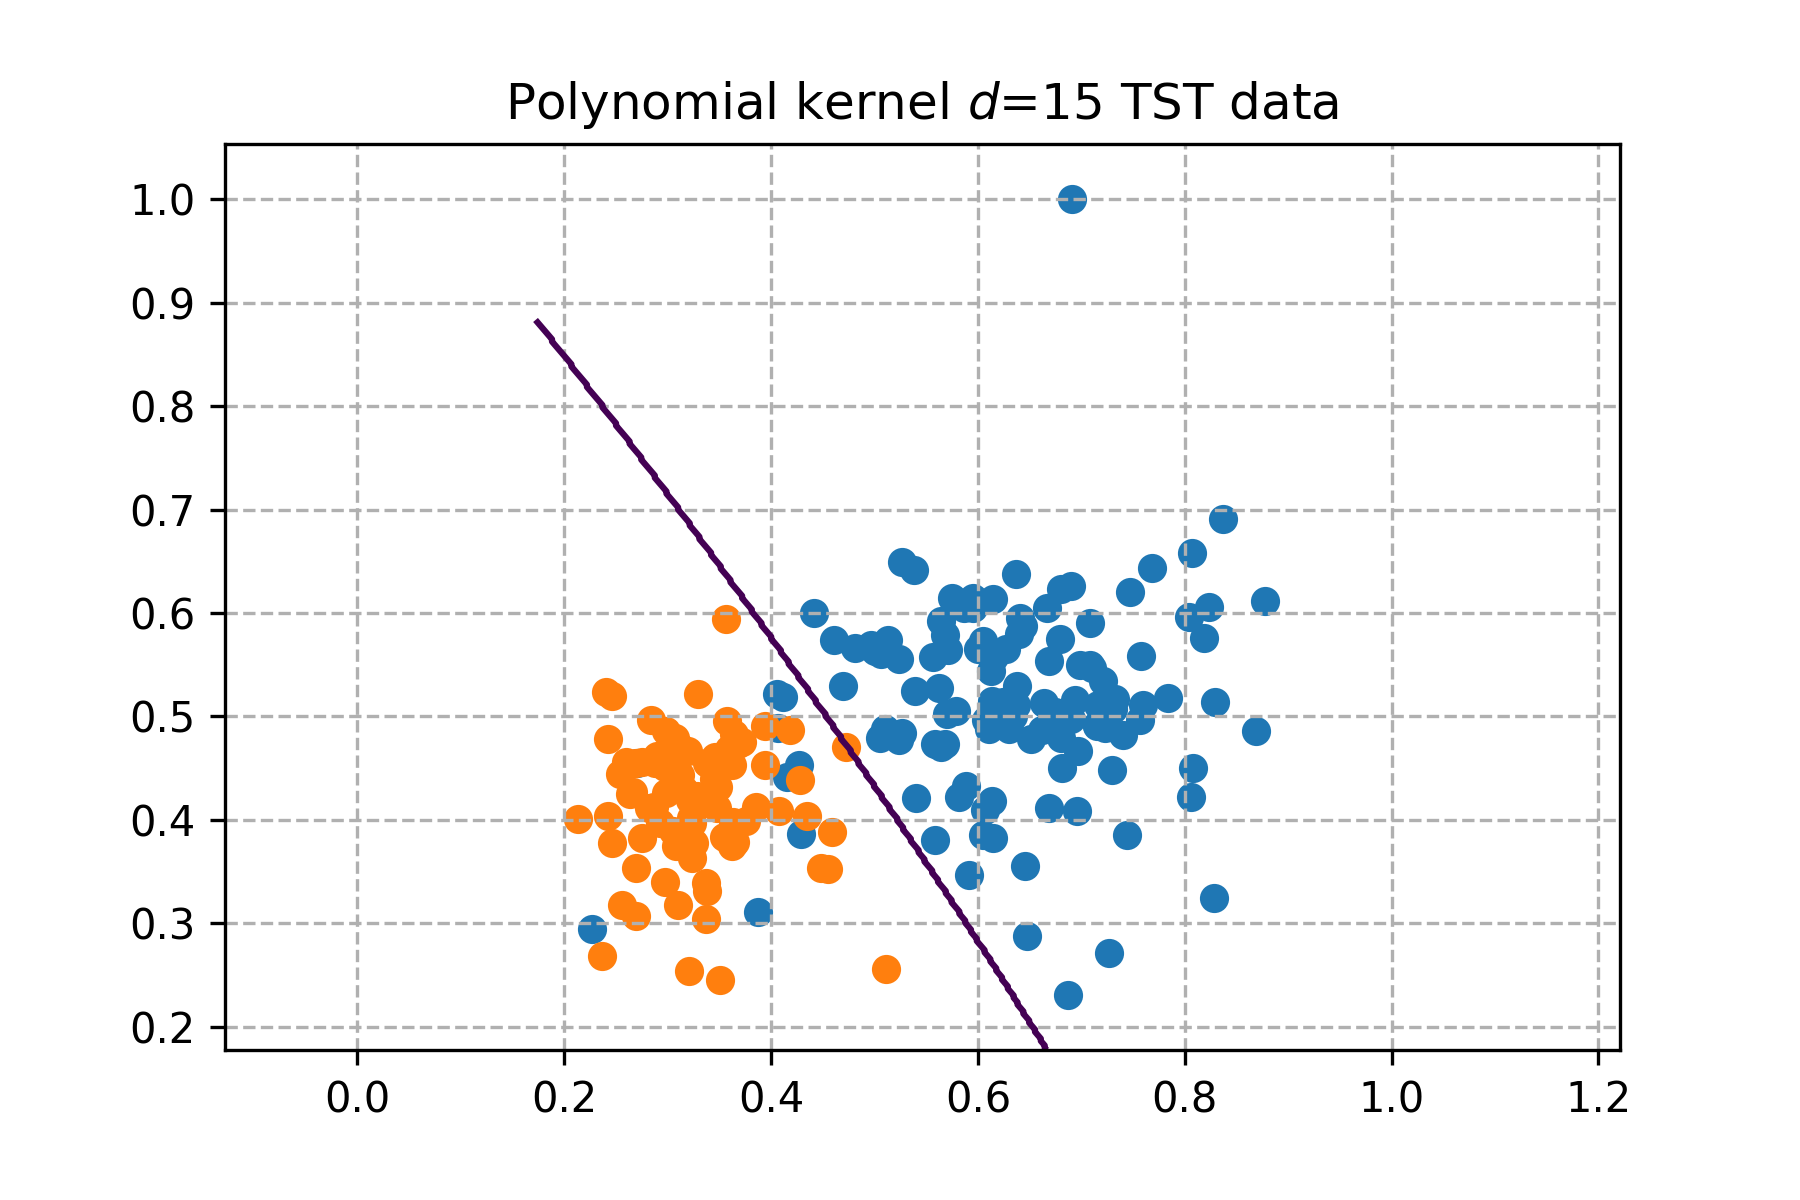 courses:be5b33rpz:labs:09_svm:ocr_polynomial_kernel_tst.png